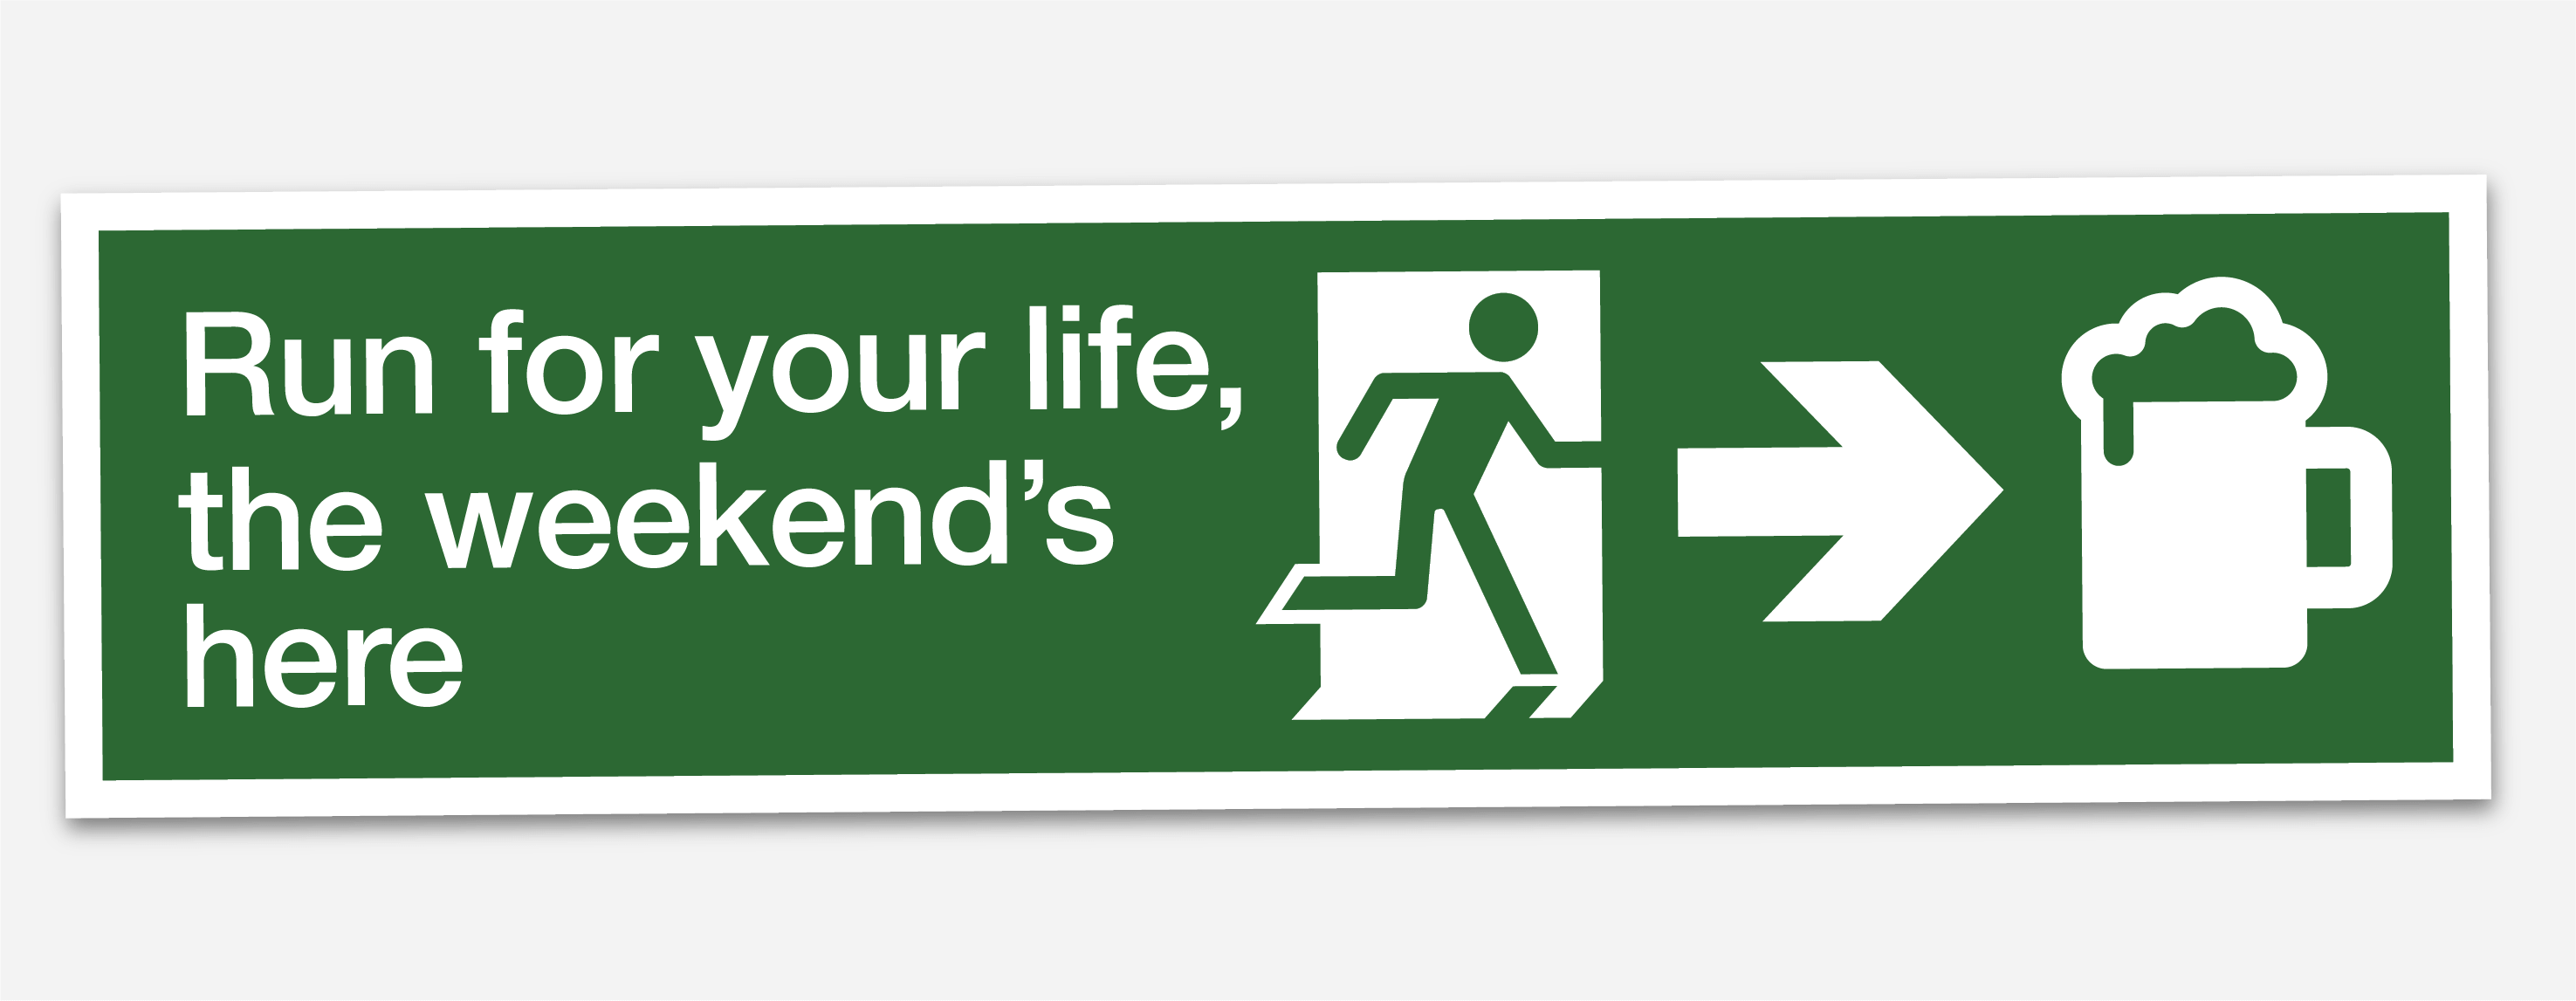 Citation | 9 funny Health & Safety signs